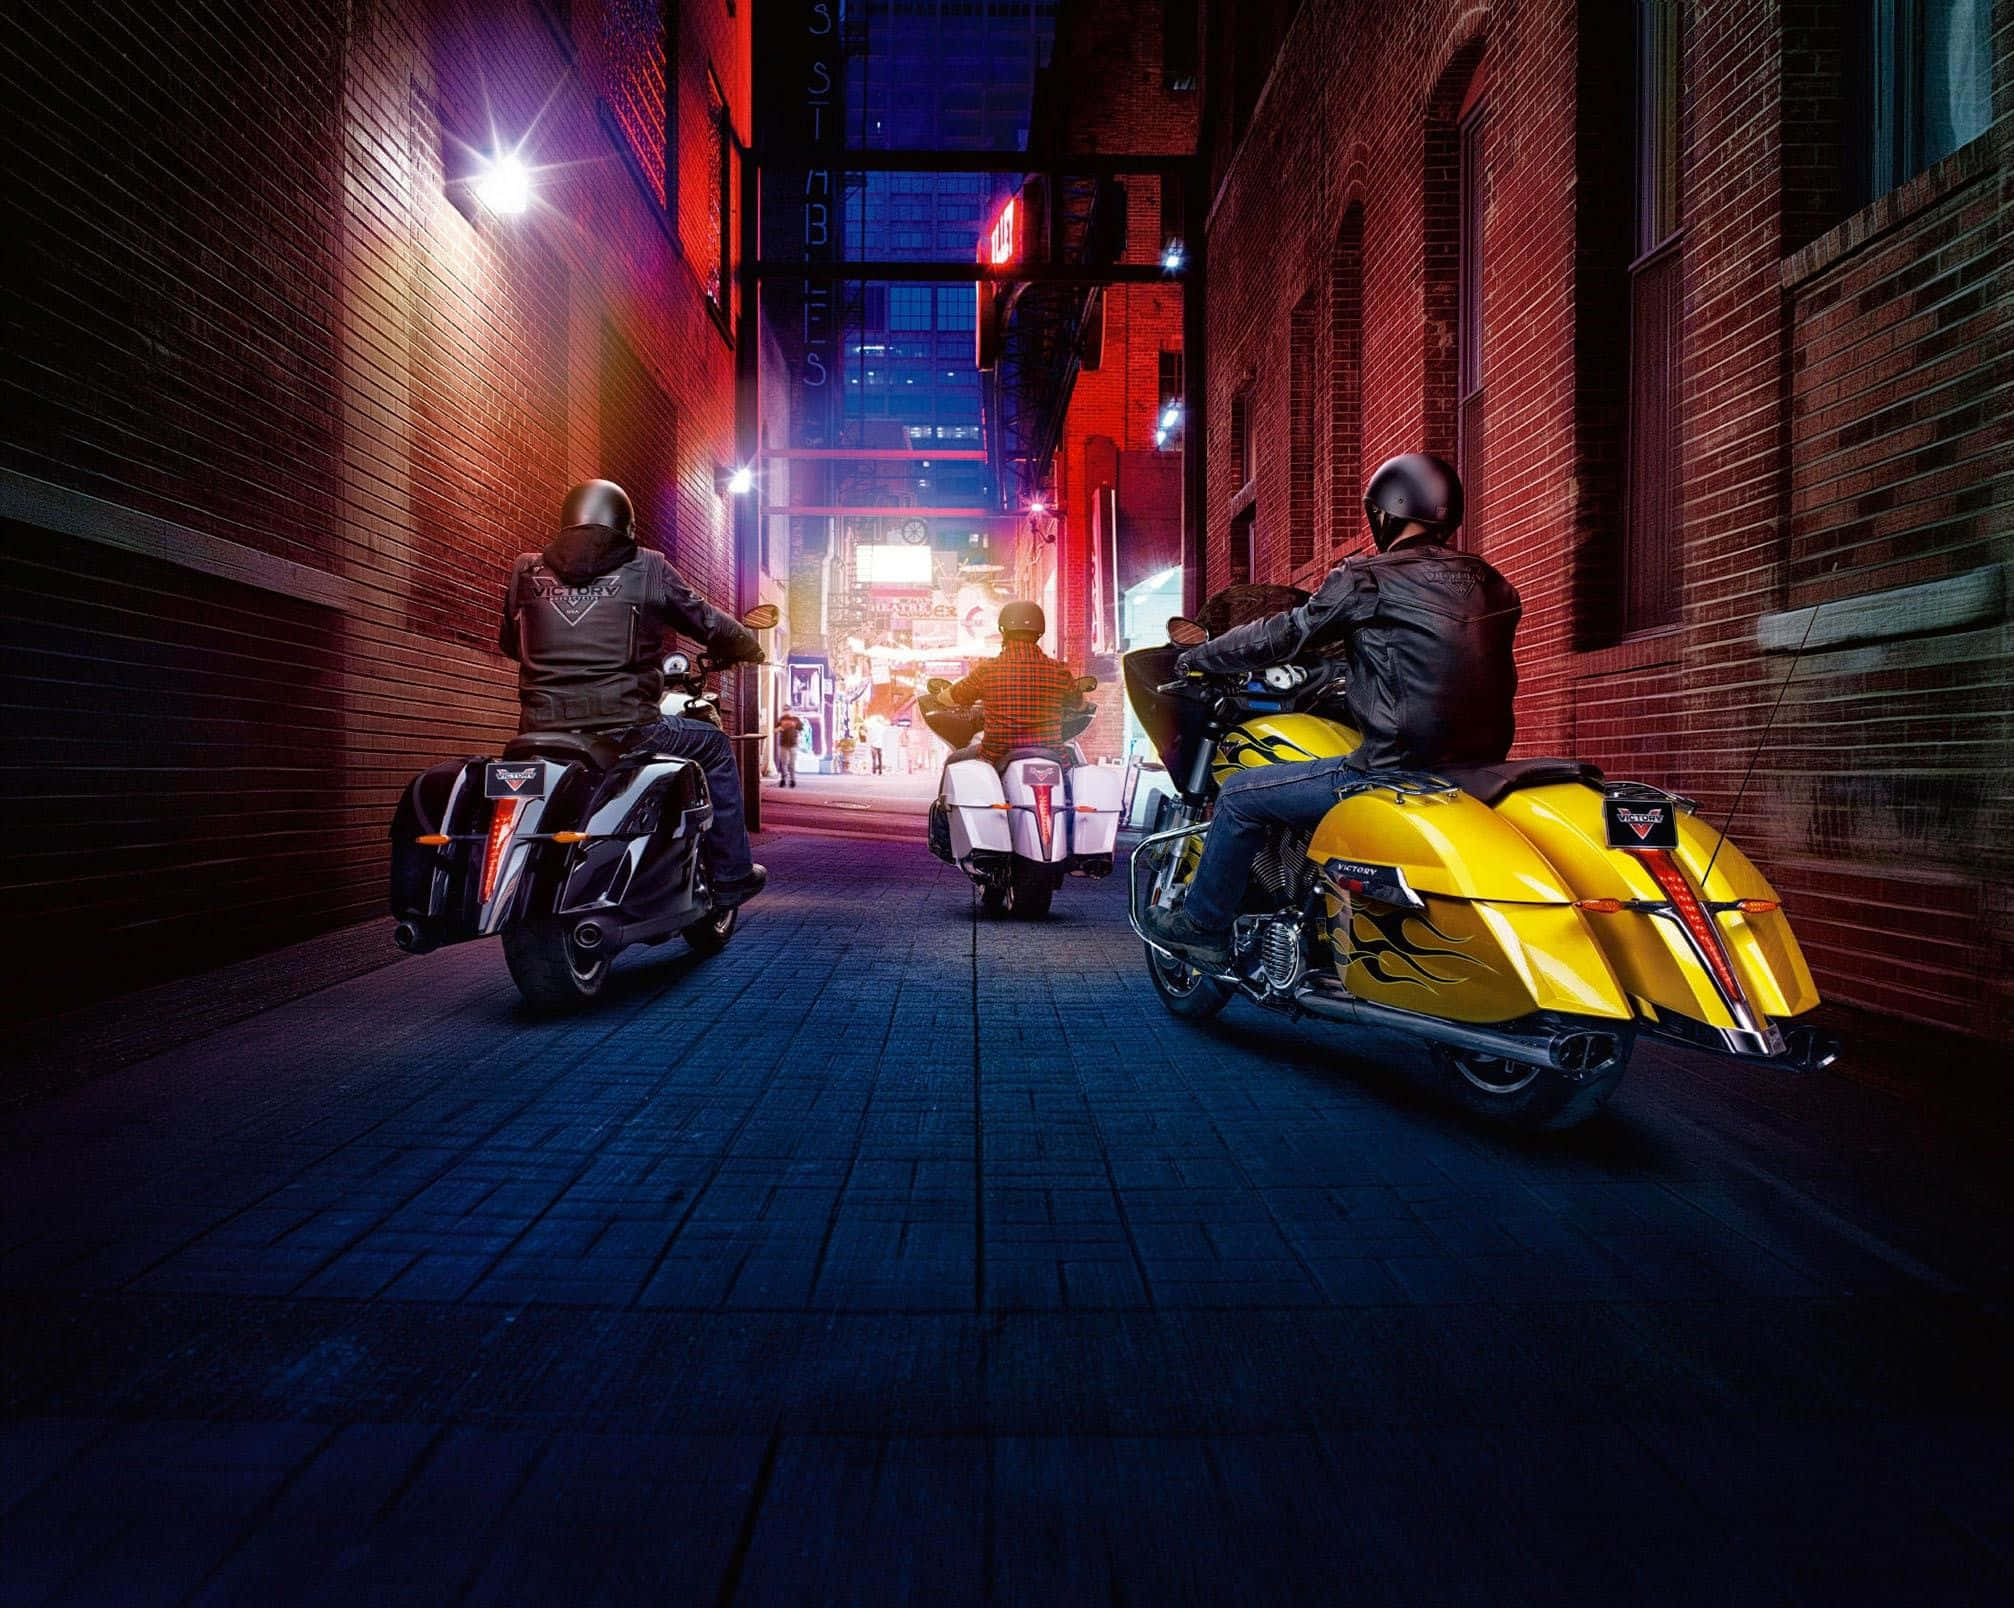 Striking Victory Motorcycle In Nighttime Cityscape